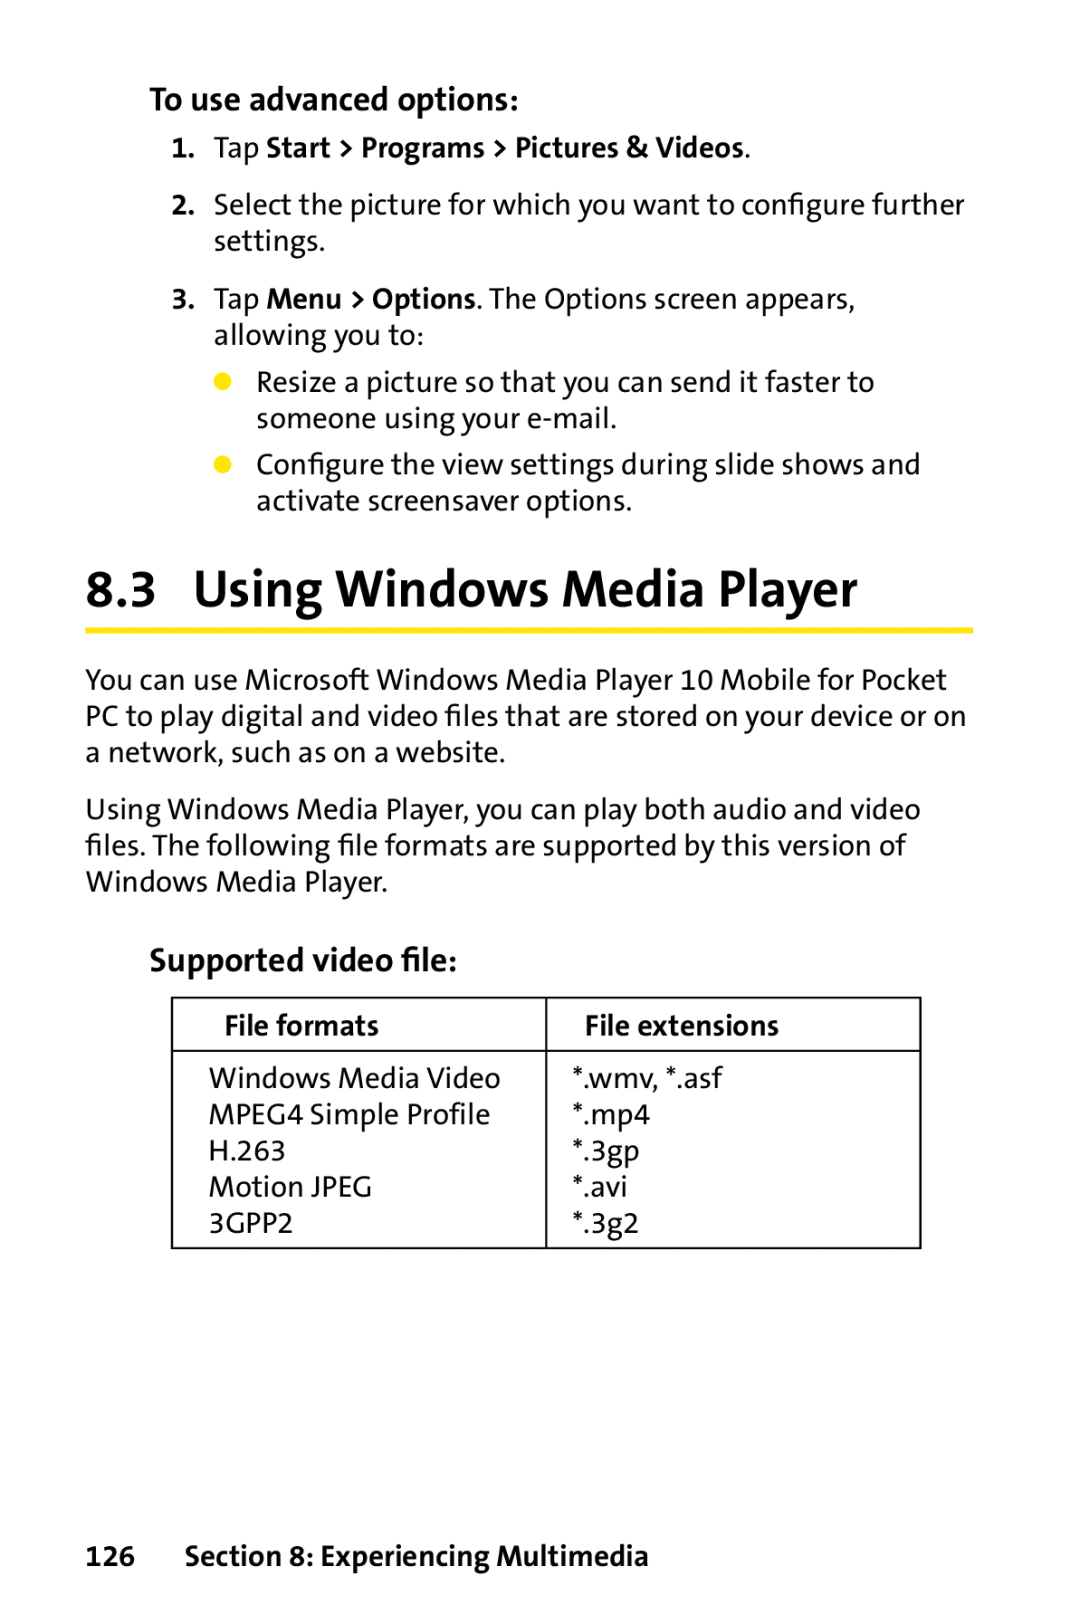 Sprint Nextel PPC-6700 manual Using Windows Media Player, To use advanced options, Supported video ﬁle, File formats 